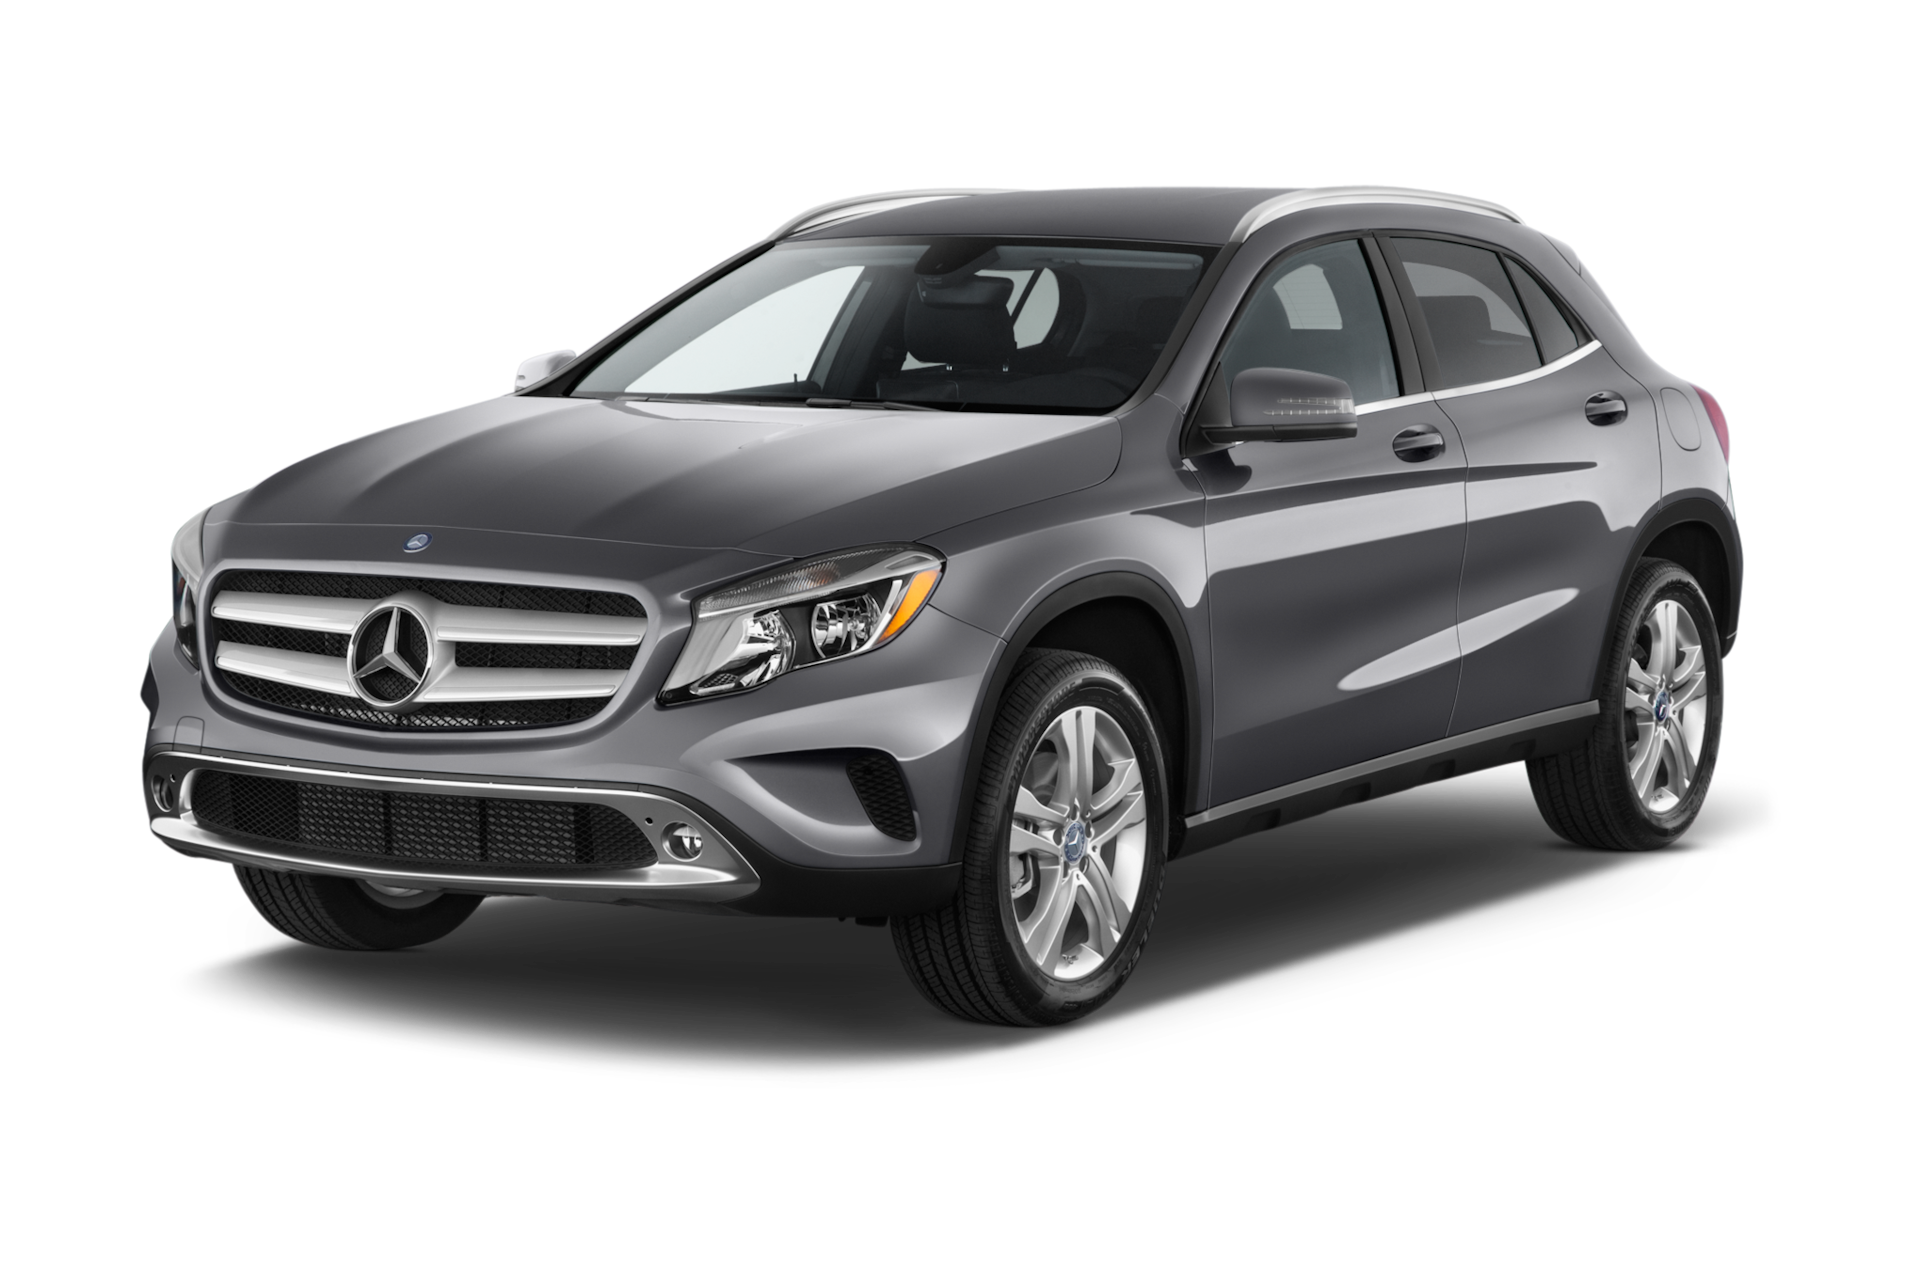 2017 Mercedes-Benz GLA-Class Prices, Reviews, and Photos - MotorTrend